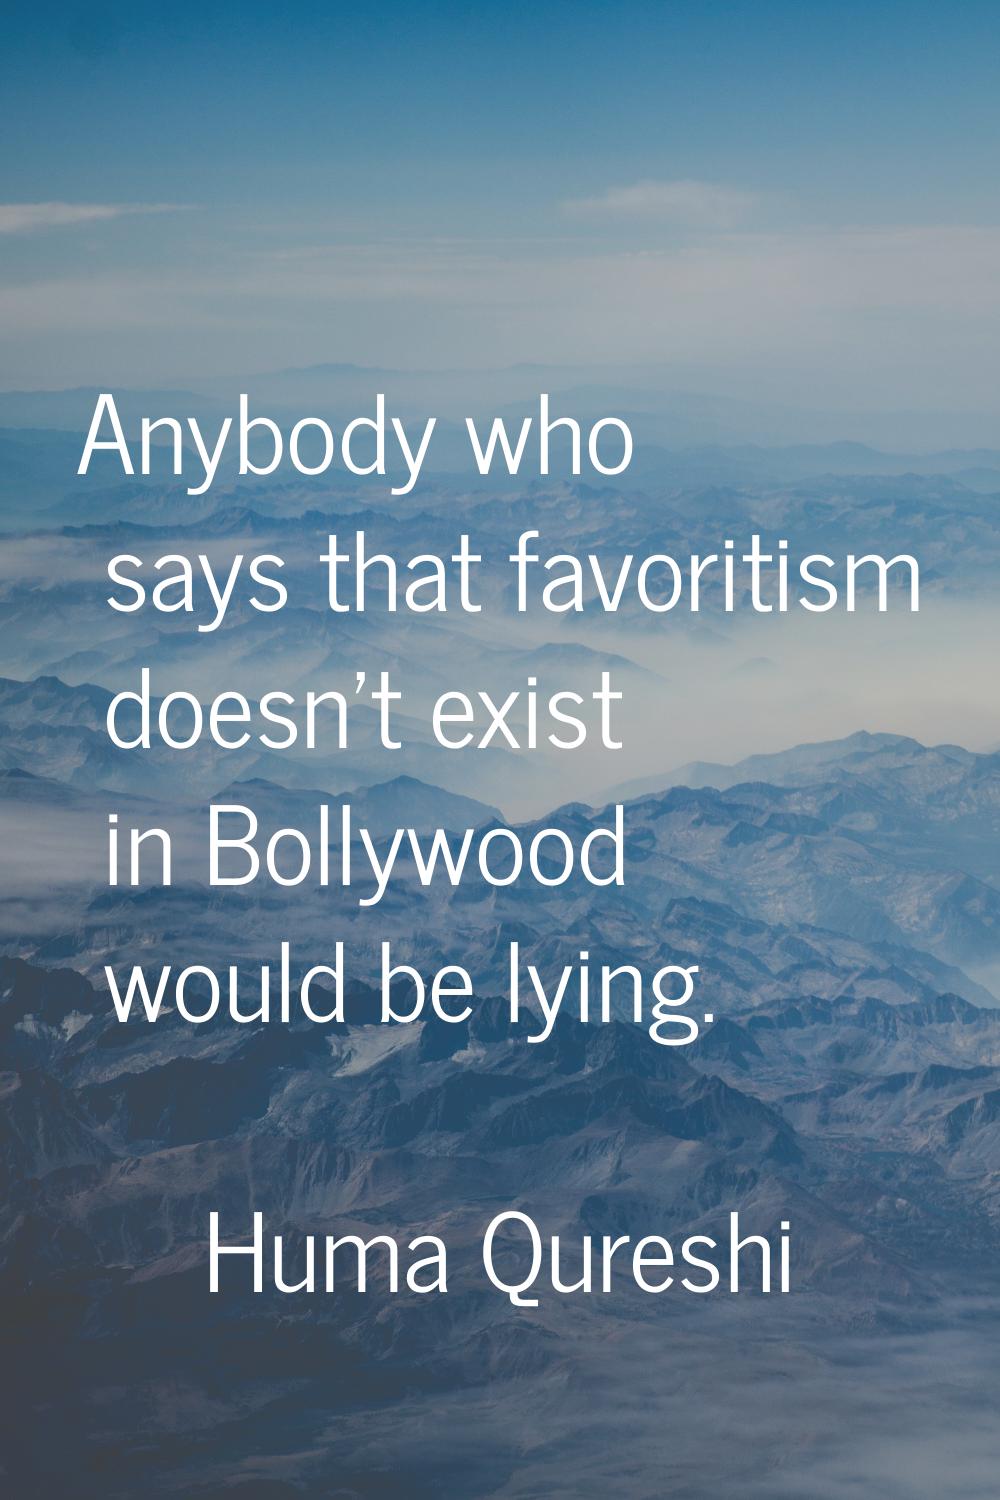 Anybody who says that favoritism doesn't exist in Bollywood would be lying.